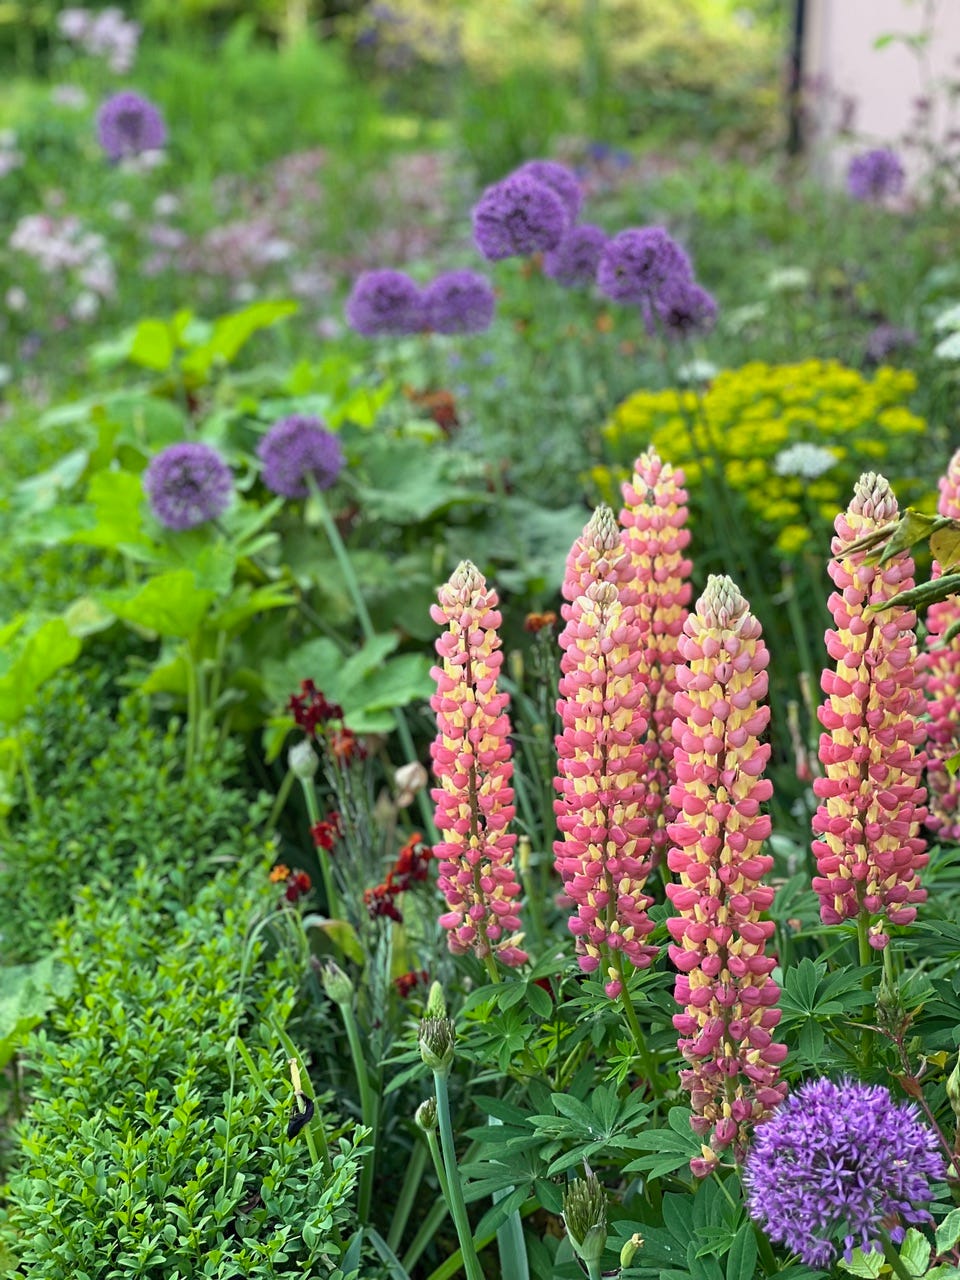 Alliums and lupins in a beautiful border full of flowers and colour